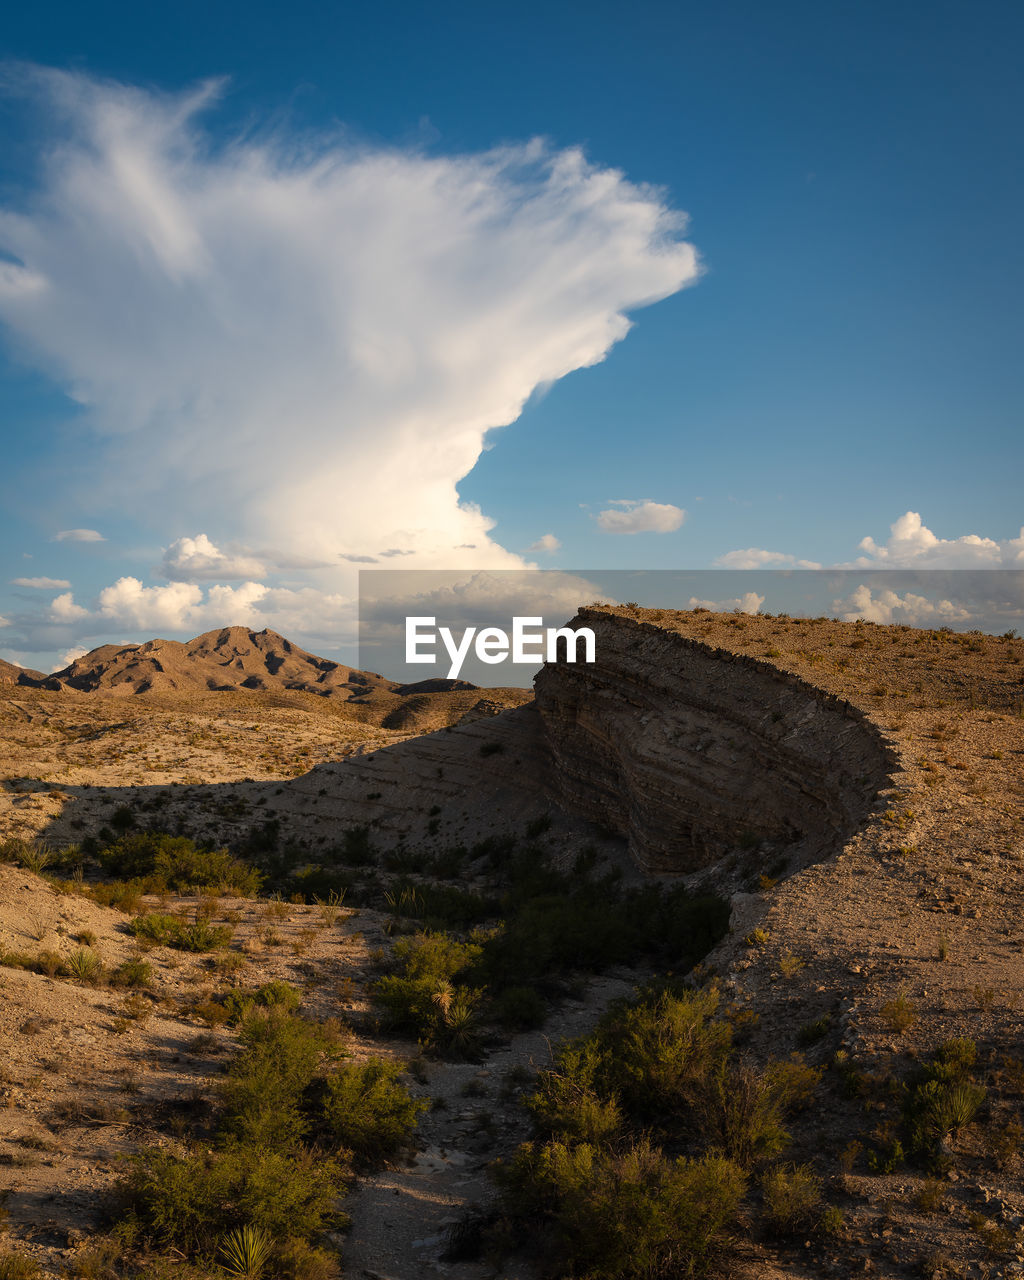 Scenic view of landscape against sky in big bend national park - texas